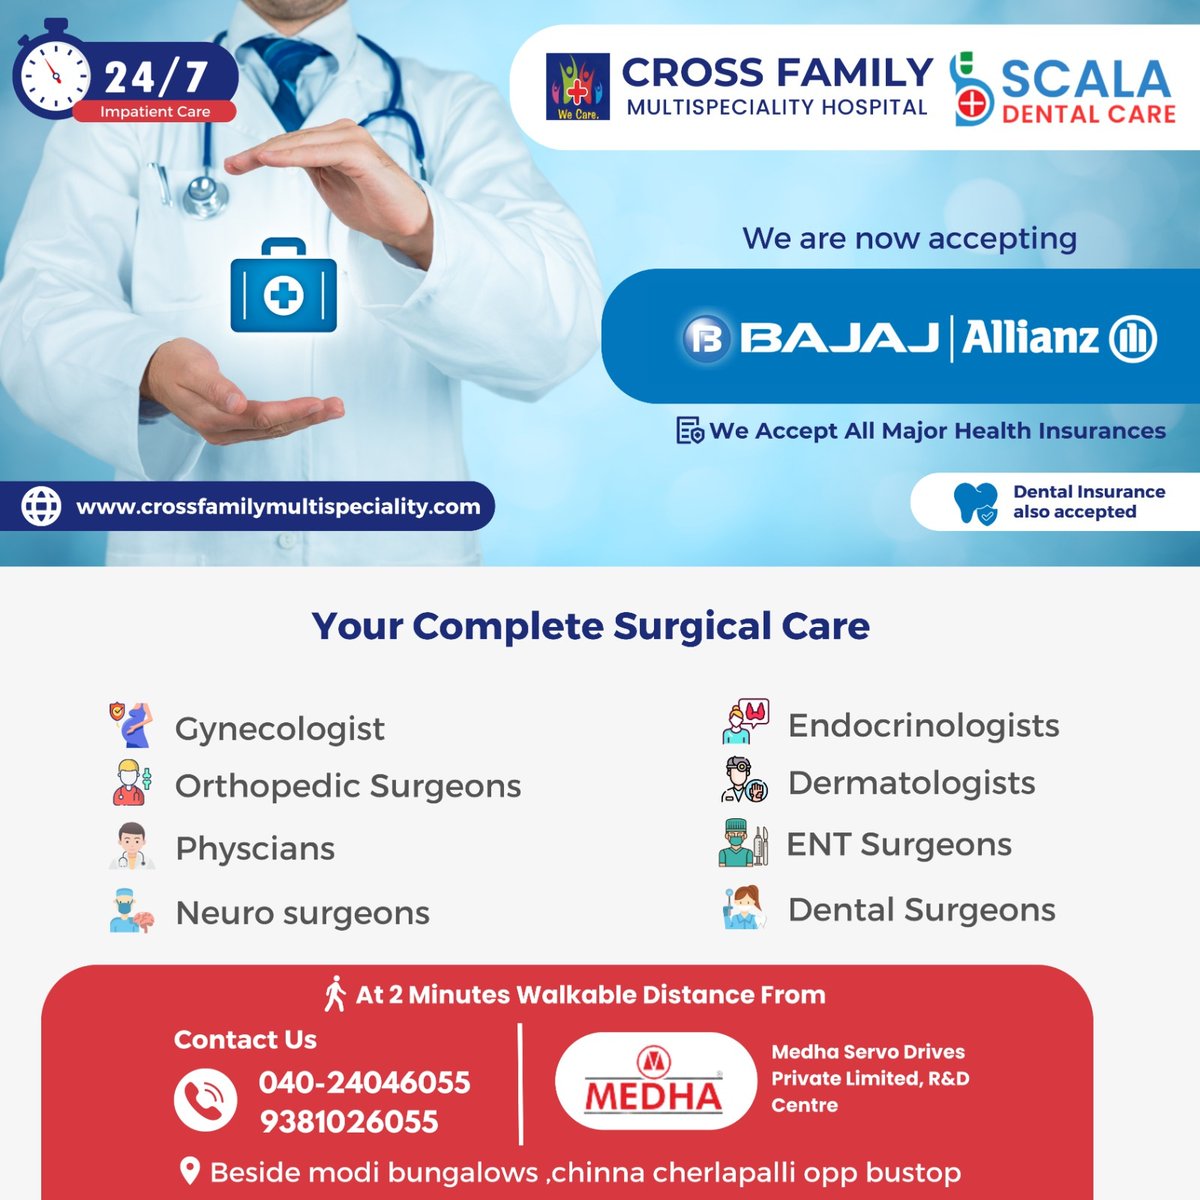 Cross Family Multispeciality Hospital & Scala Dental Care Implant Center are now accepting Bajaj Allianz Health Insurance. We also accept dental insurances .We are located 2 Minutes away from Medha R & D Center , Beside Modi Banglows , Chinna Cherlapalli Opp Bus Stop !